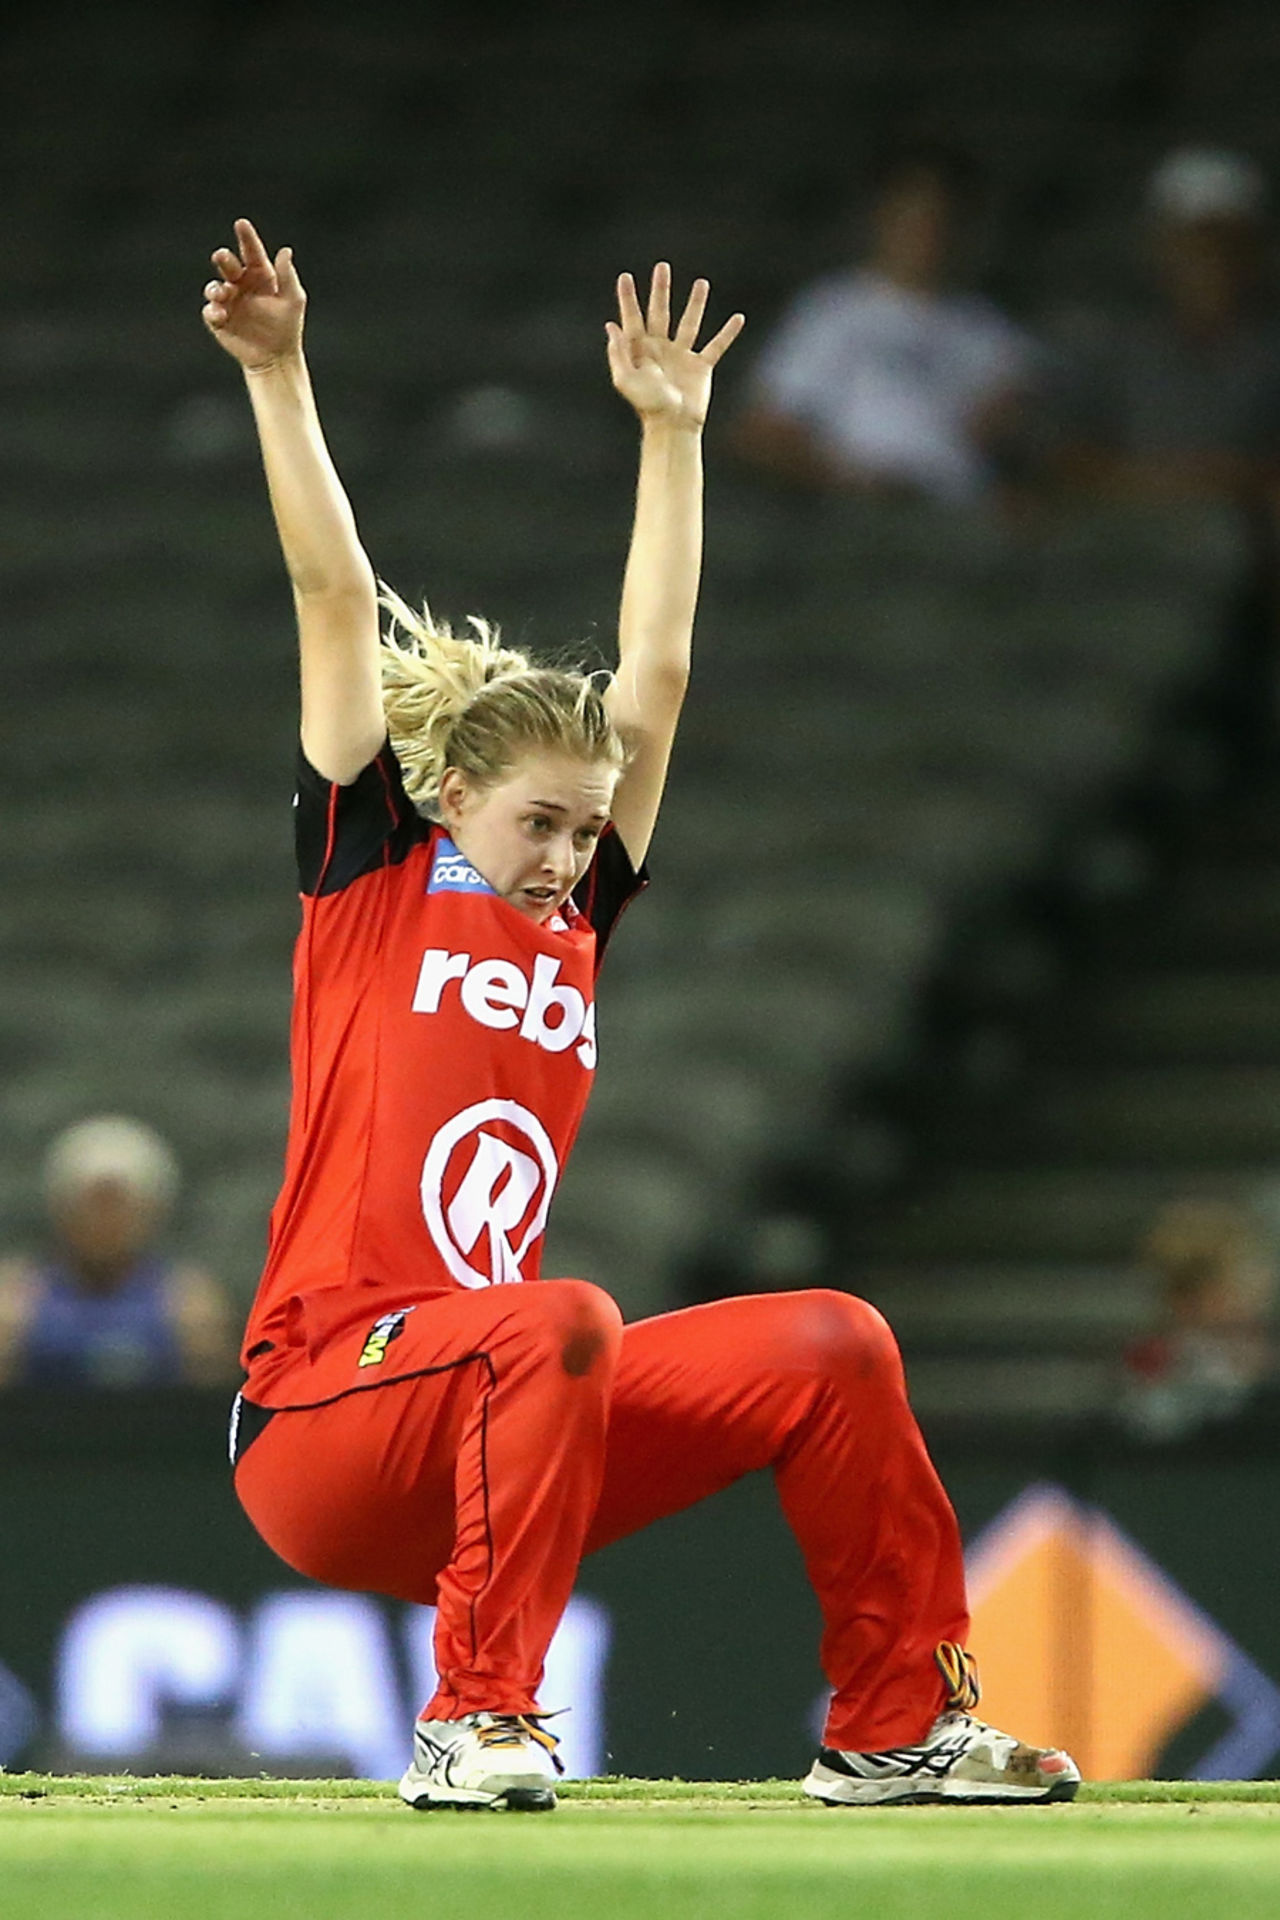 Maitlan Brown gets into an awkward position while trying to field, Renegades v Scorchers, Women's Big Bash League, Melbourne, December 29, 2016